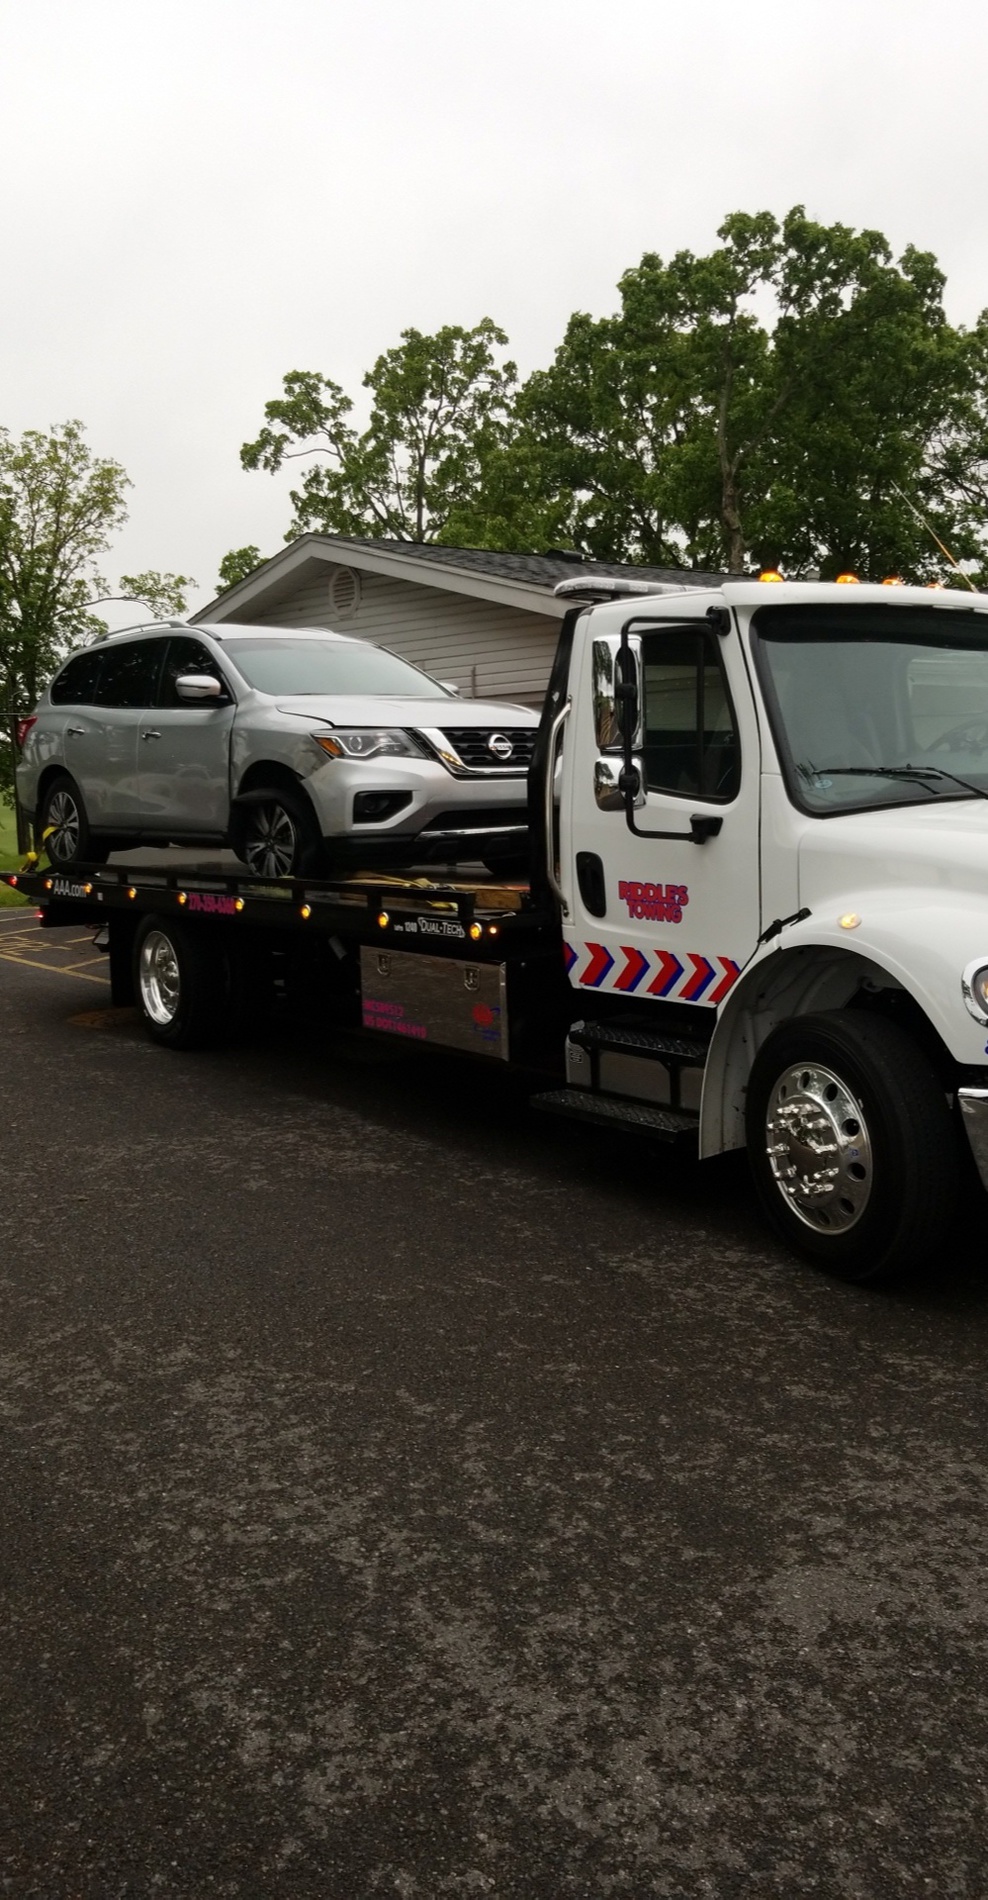 Images Riddle's 24 Hour Towing & Lockout, LLC